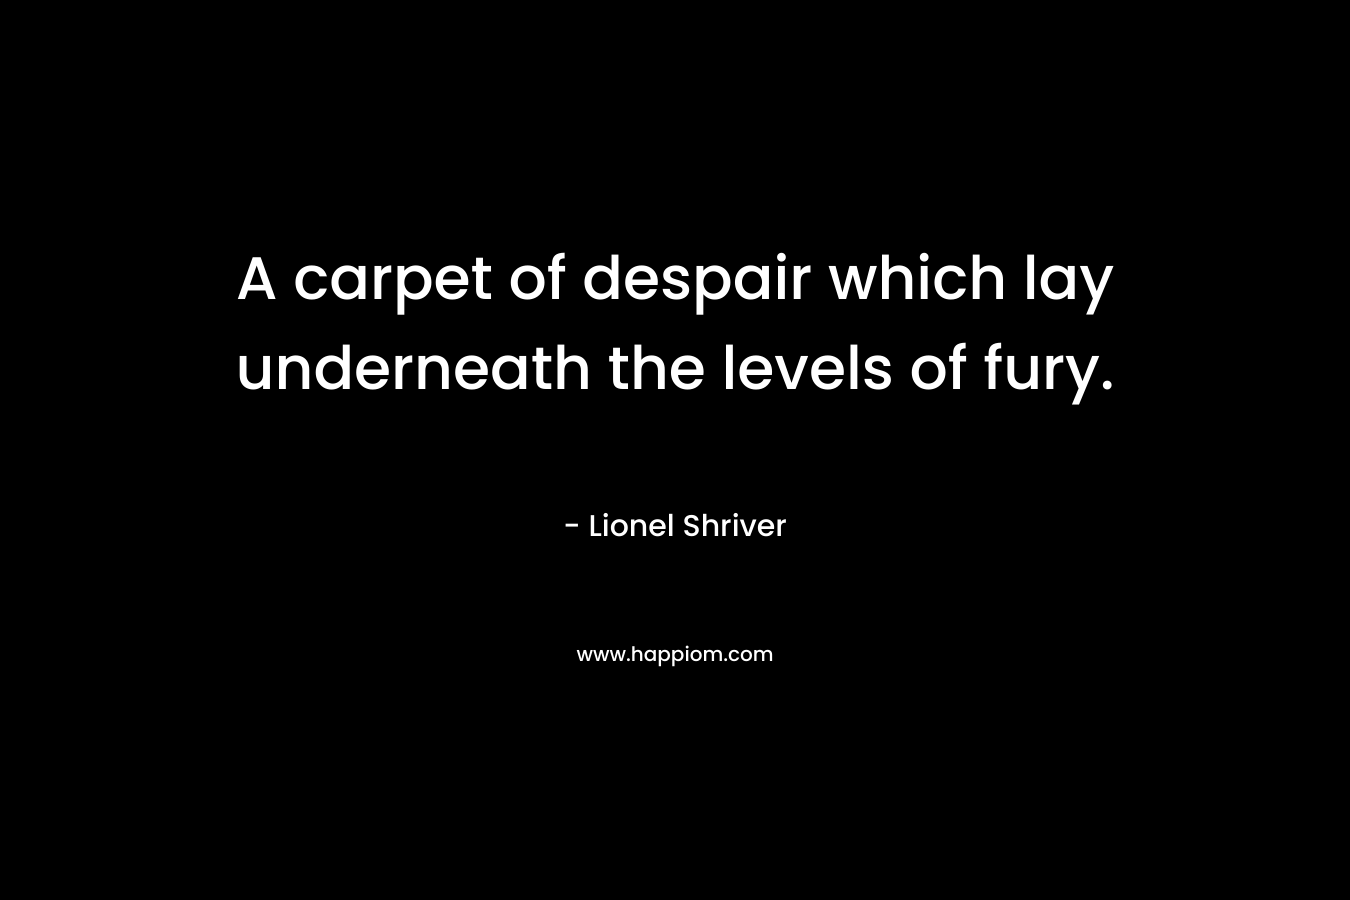 A carpet of despair which lay underneath the levels of fury. – Lionel Shriver